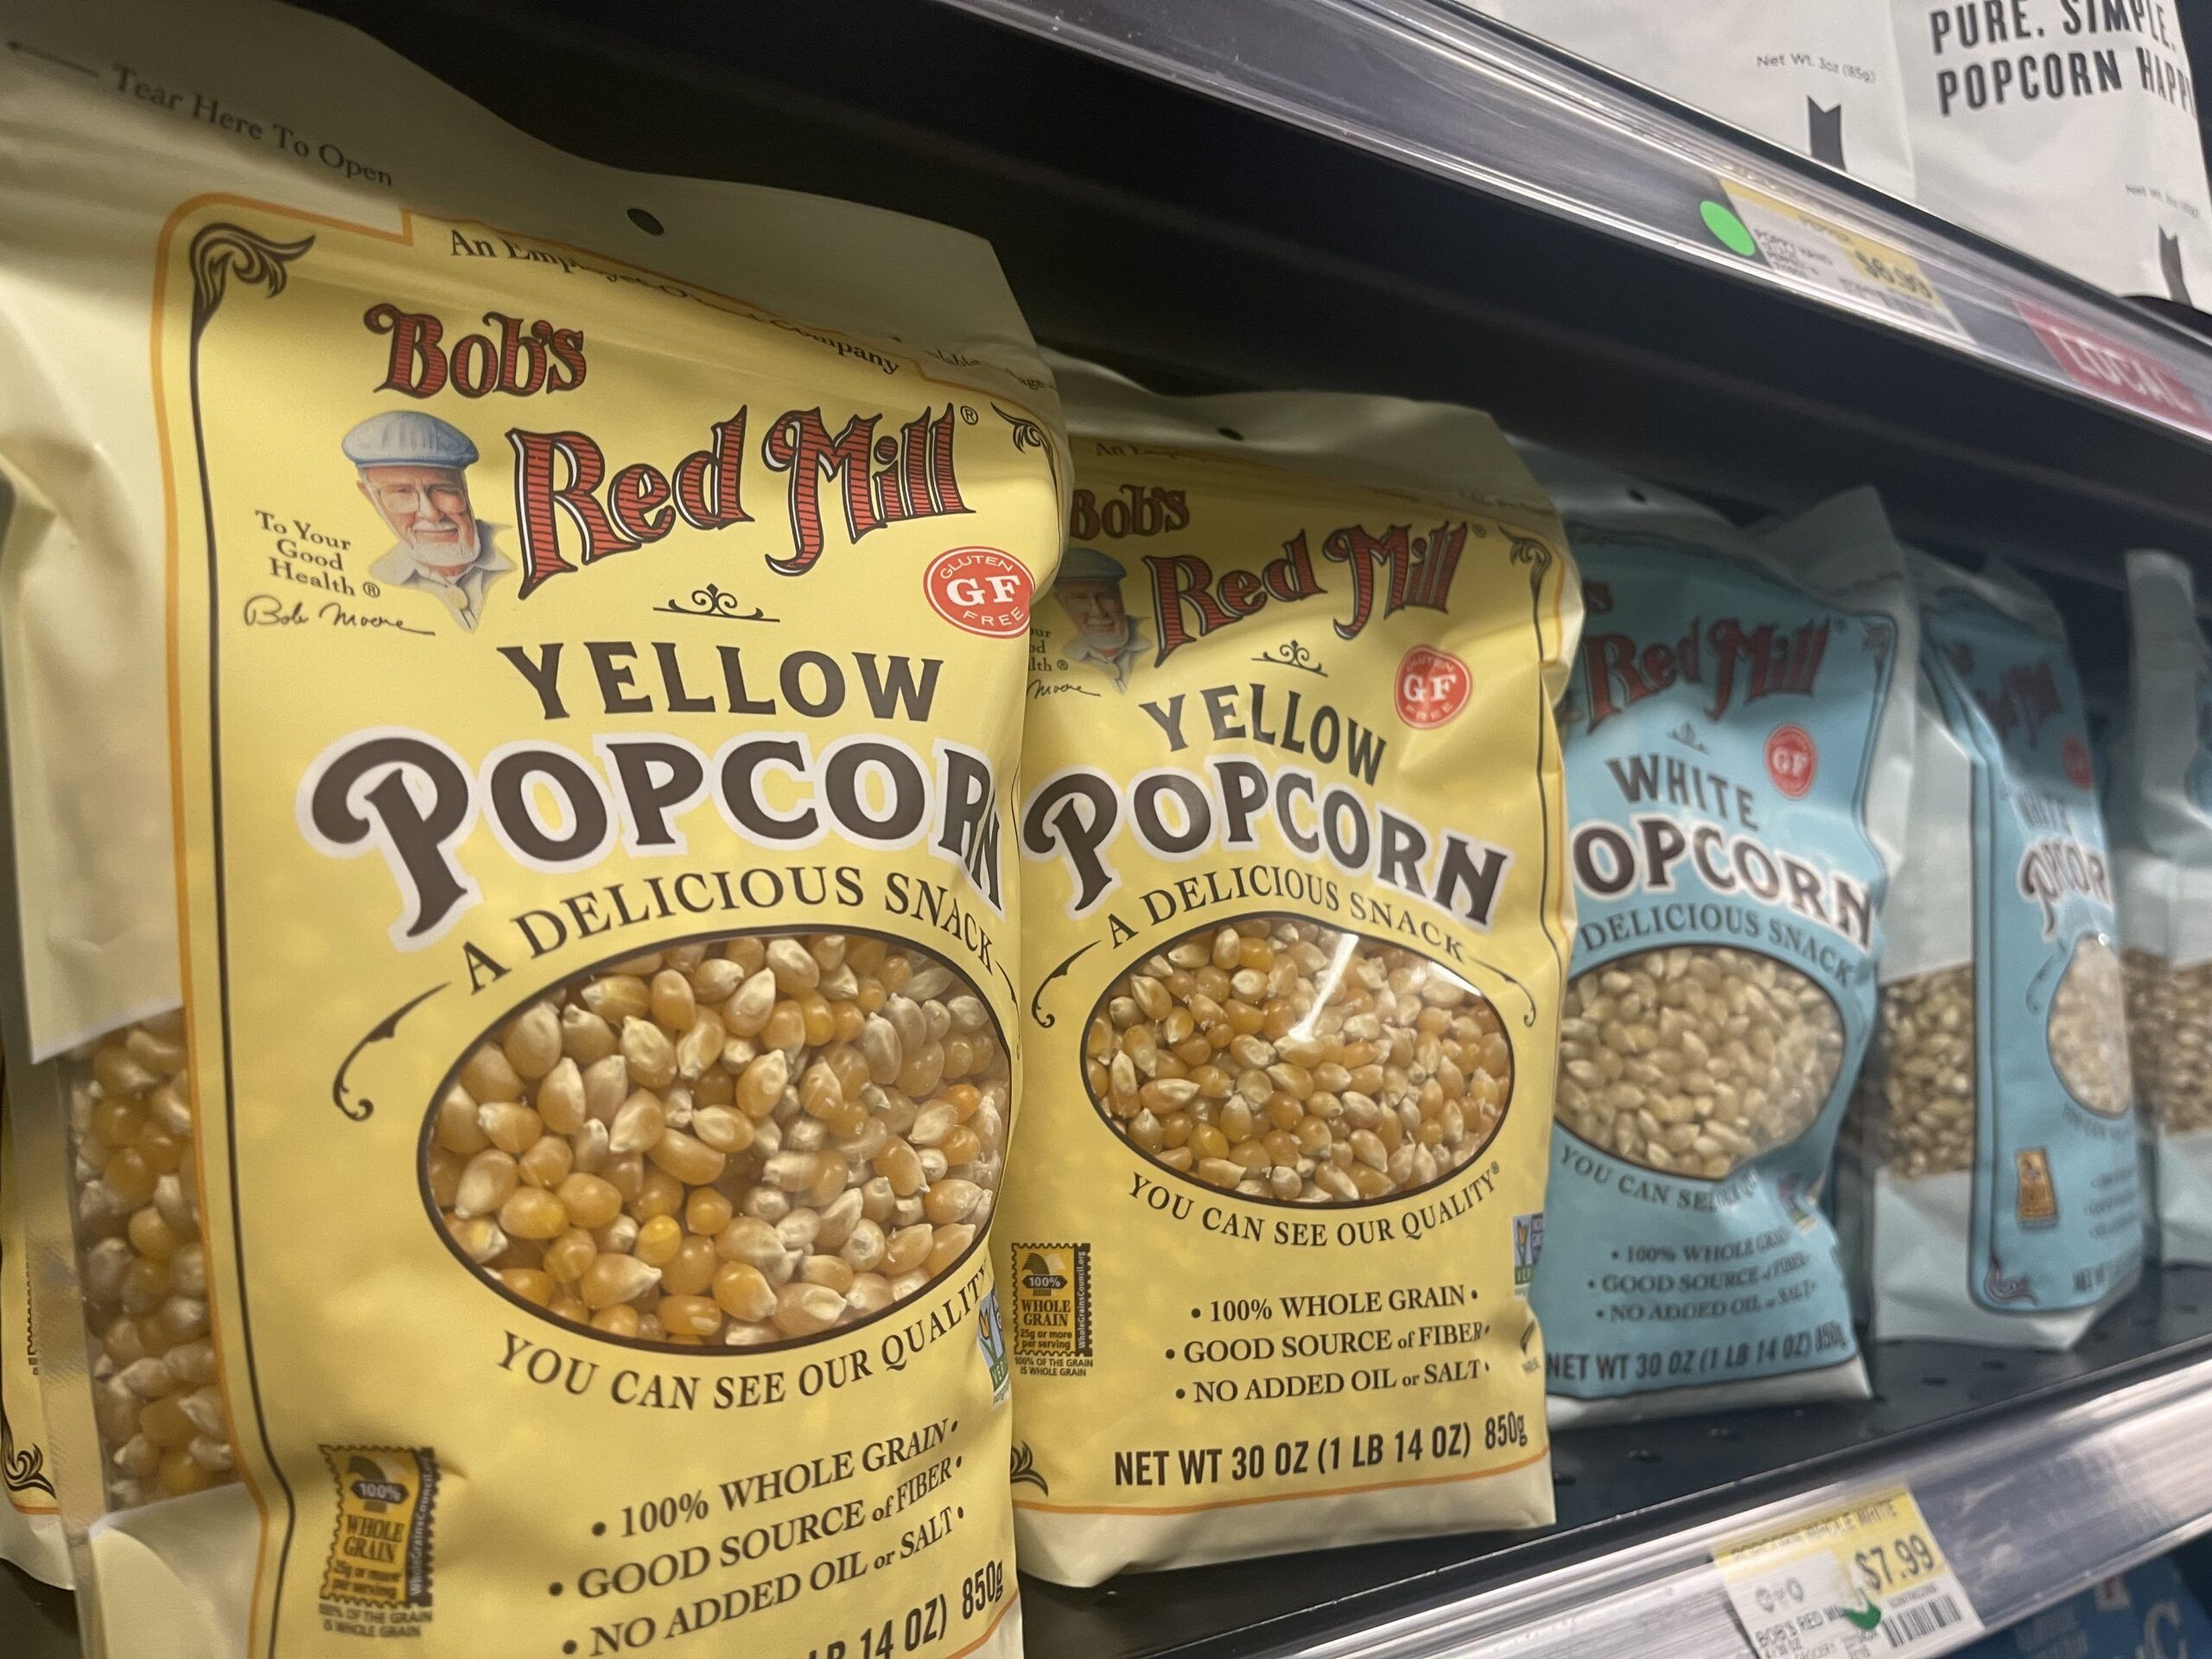 bobs red mill yellow popcorn